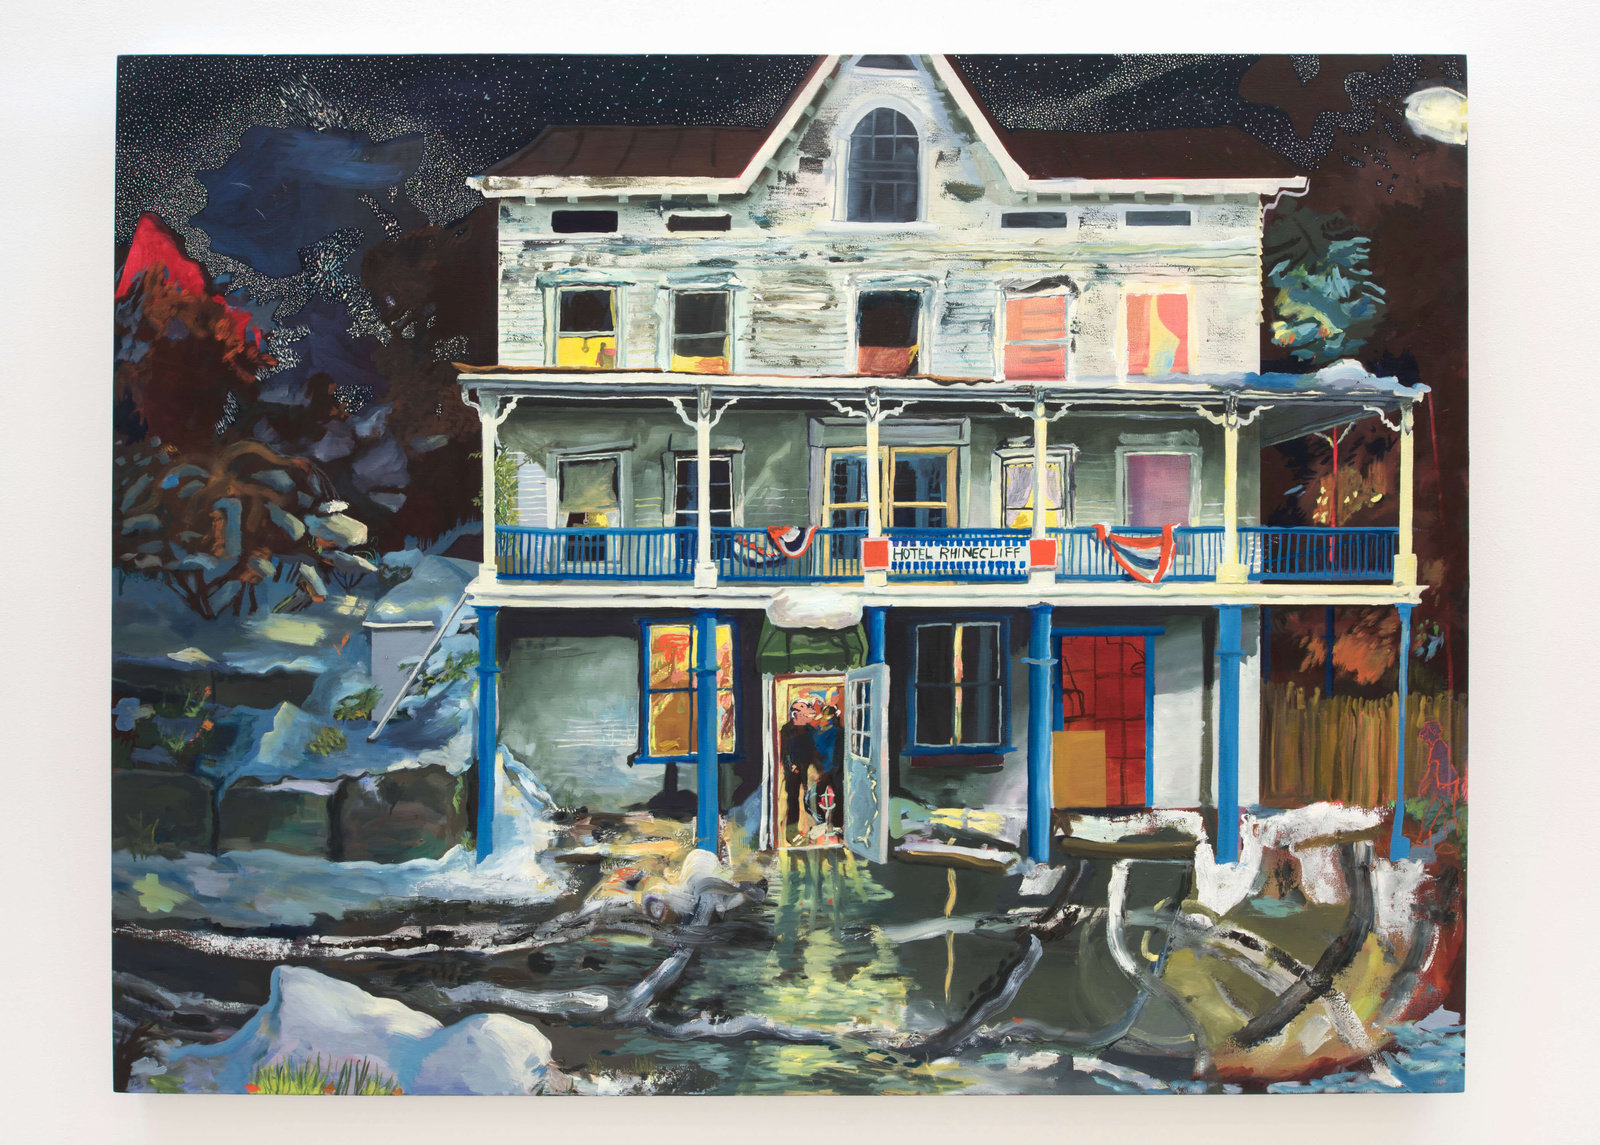 Early snow rhinecliff hotel by celeste dupuy spencer marlborough contemporary new york